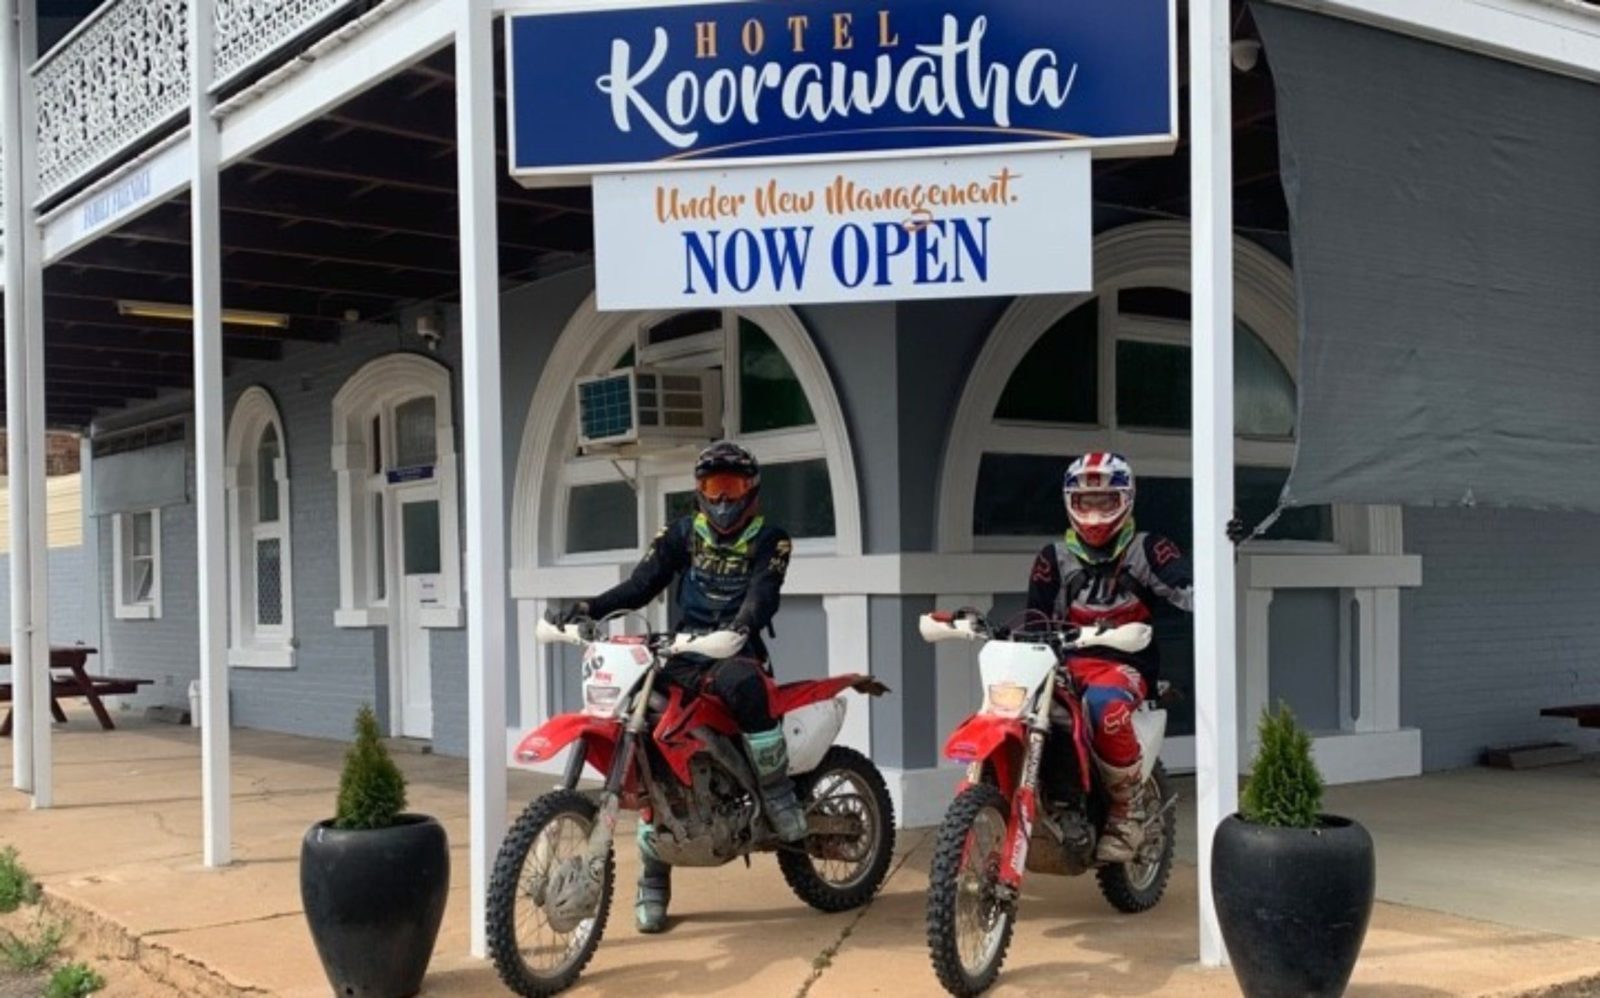 Take a drive, meet friends,enjoy the rural ambiance and services at Hotel Koorawatha.